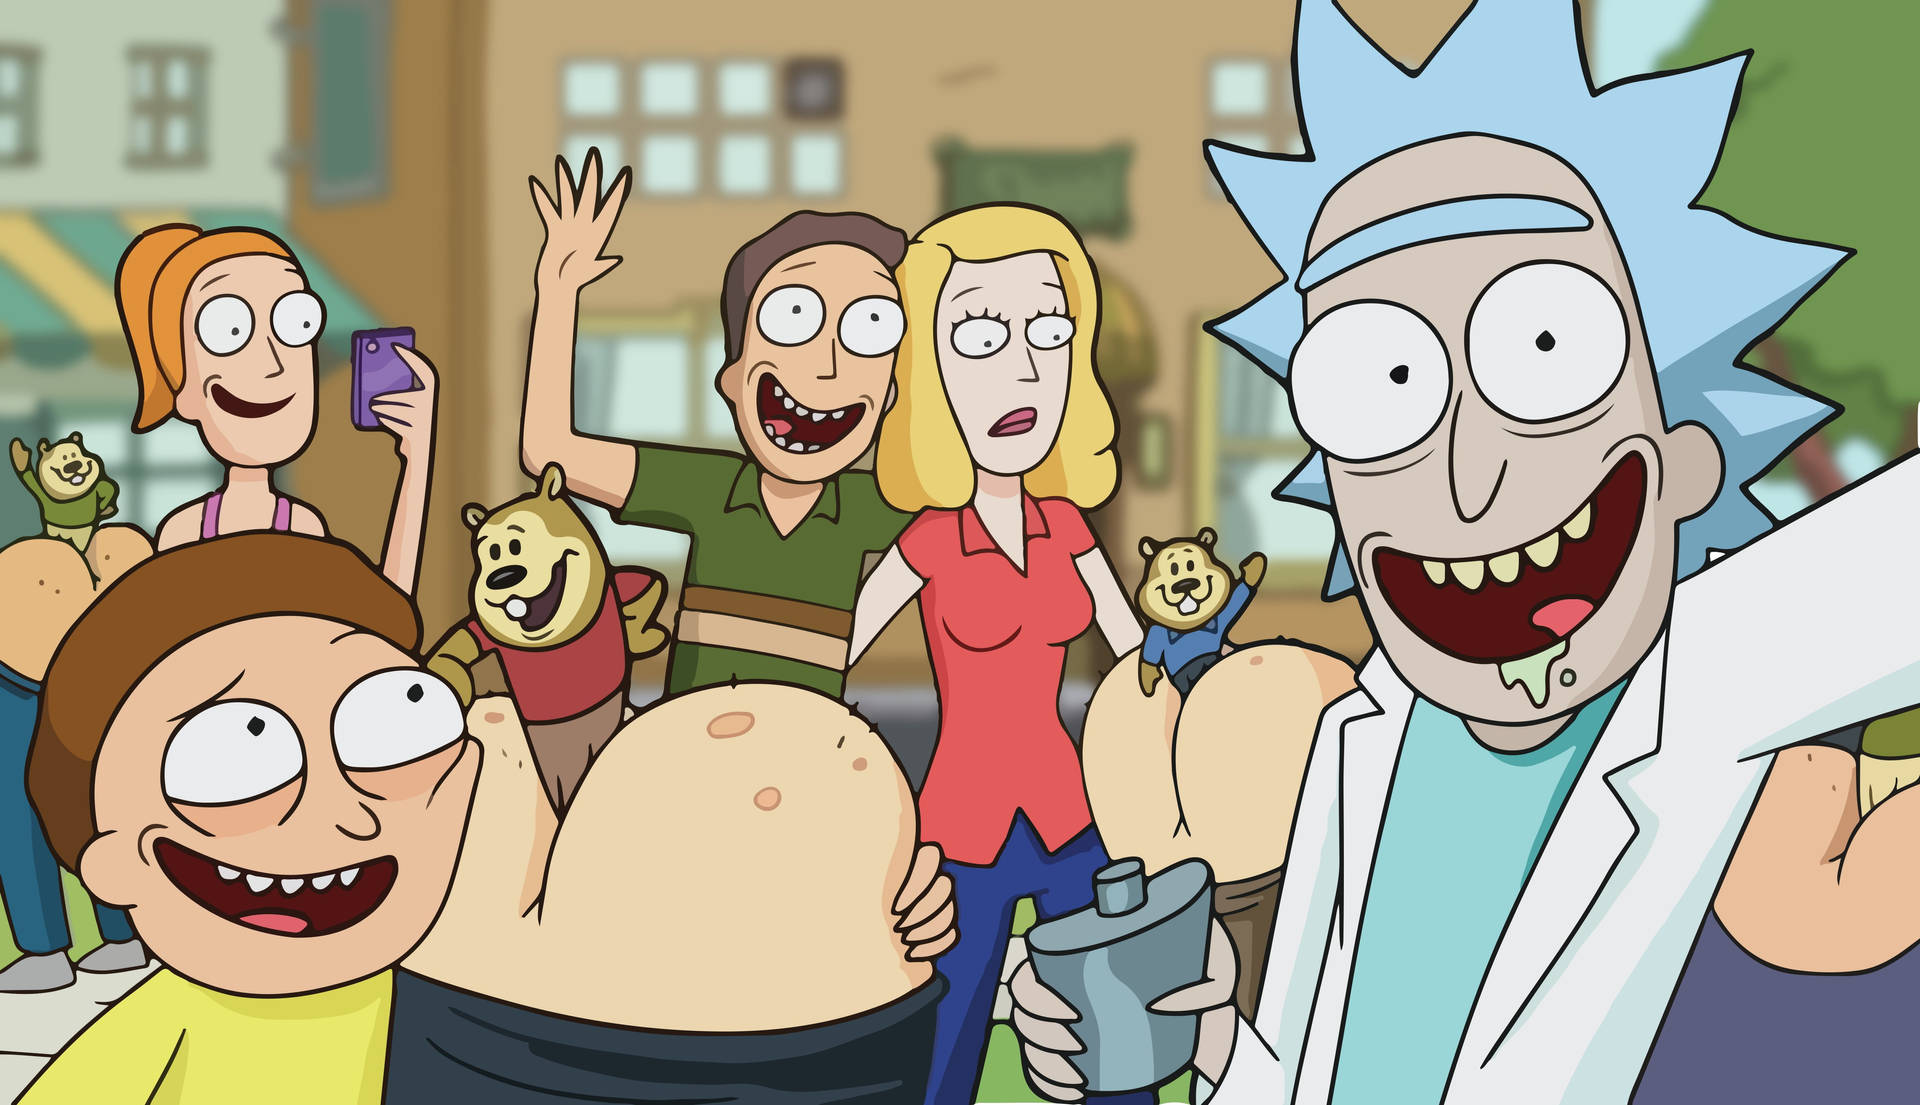 Family Picture Rick And Morty PC 4K Wallpaper